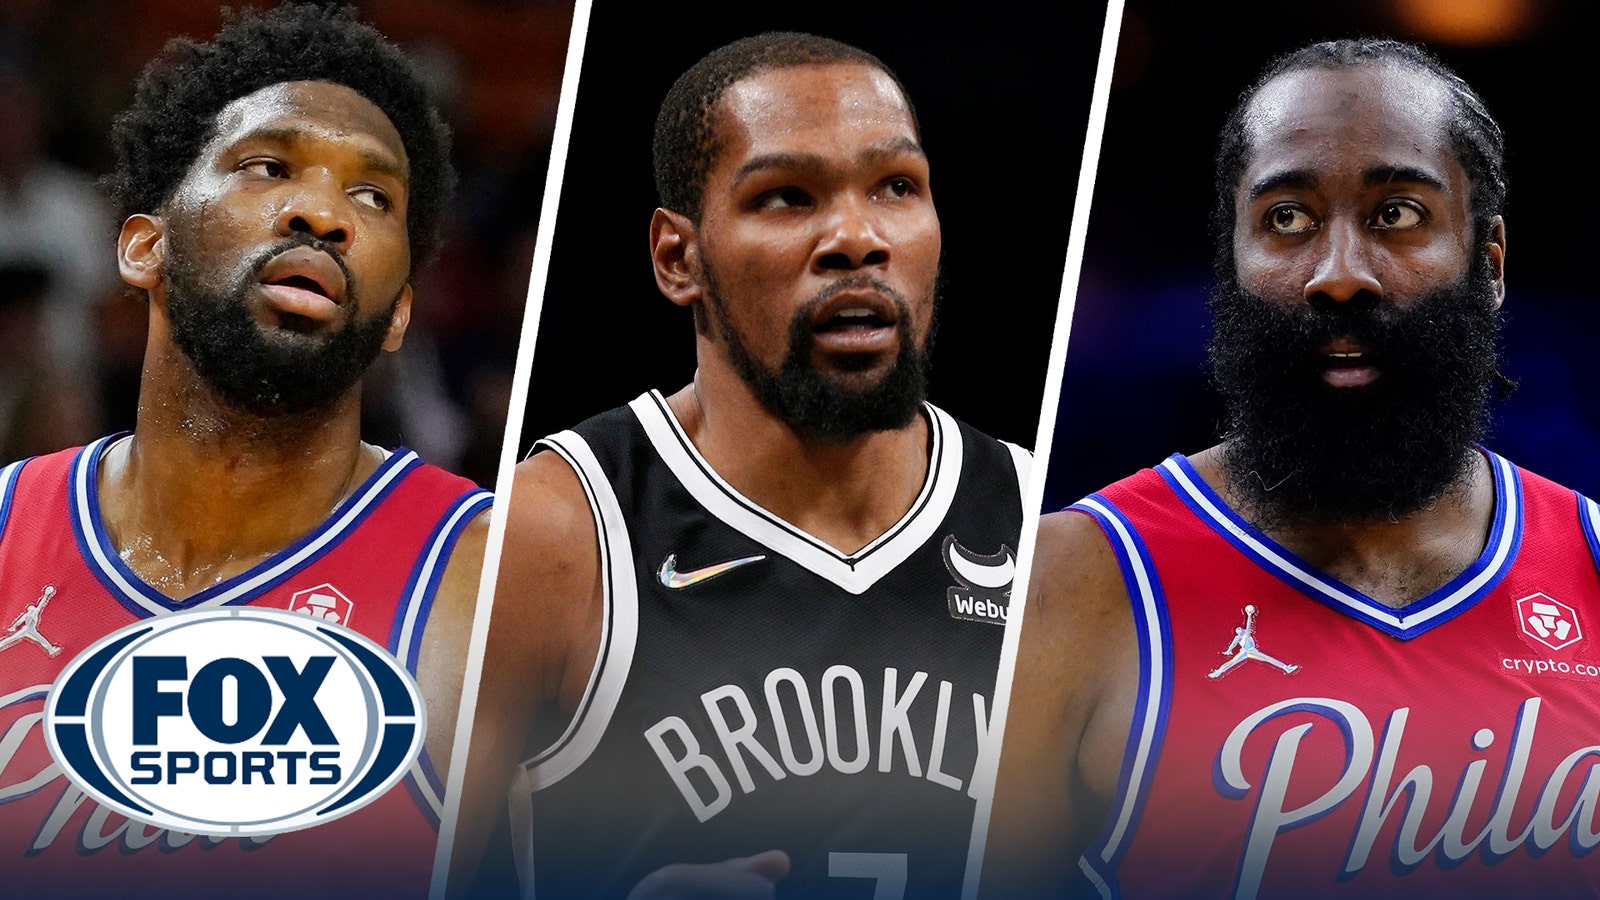 Simmons vs. Philly fans, Durant vs. Harden and other beefs in Sixers-Nets